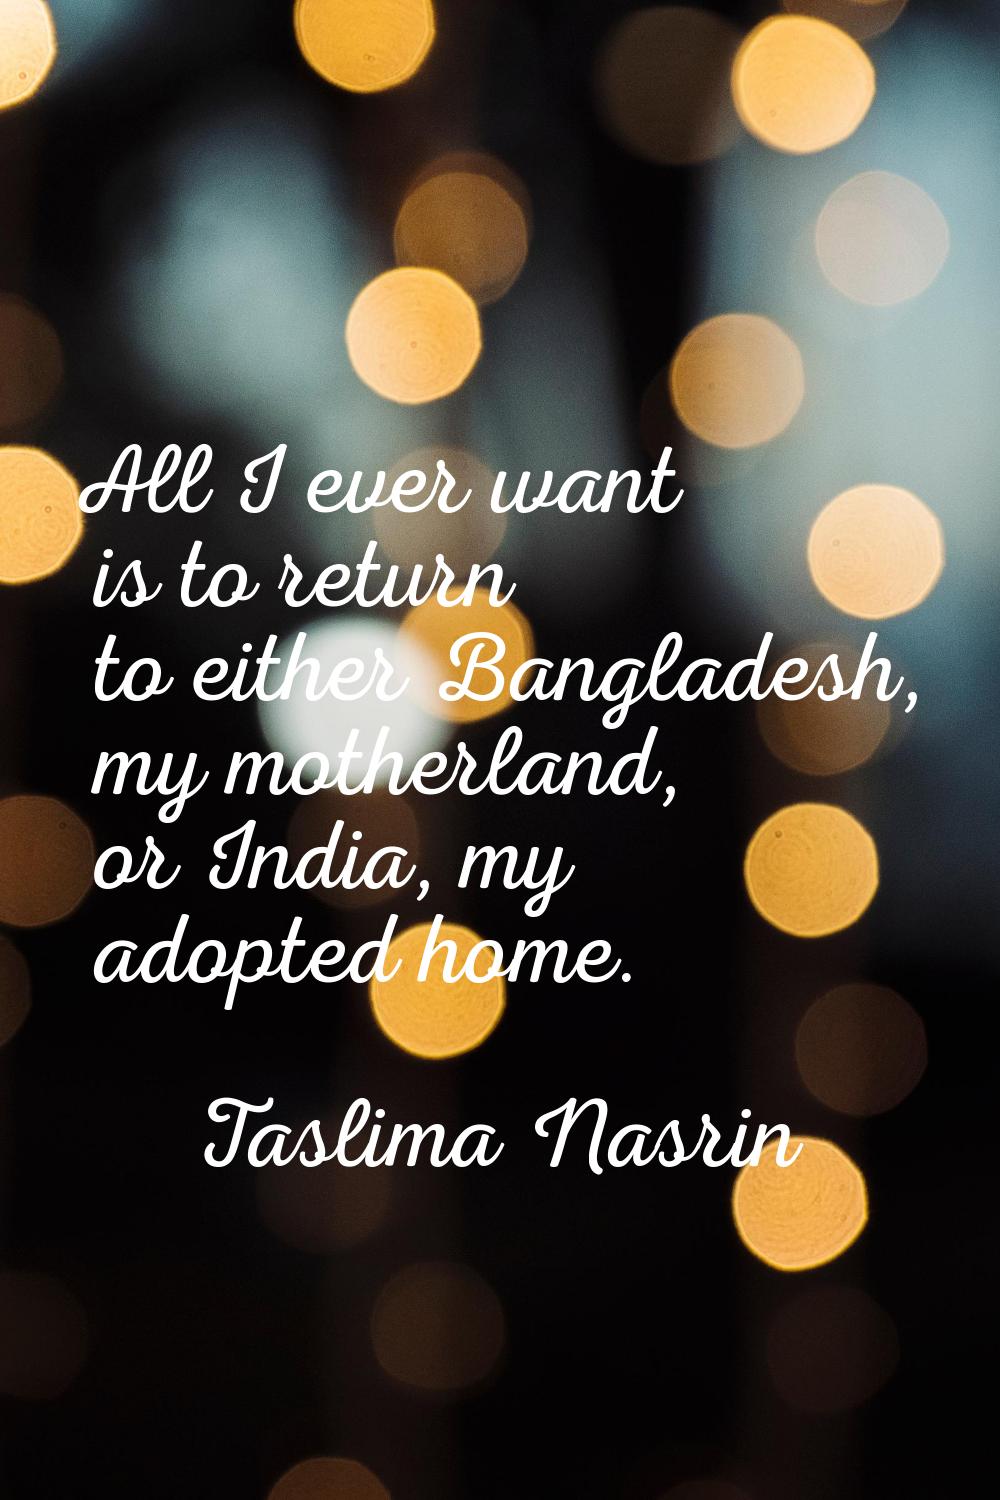 All I ever want is to return to either Bangladesh, my motherland, or India, my adopted home.